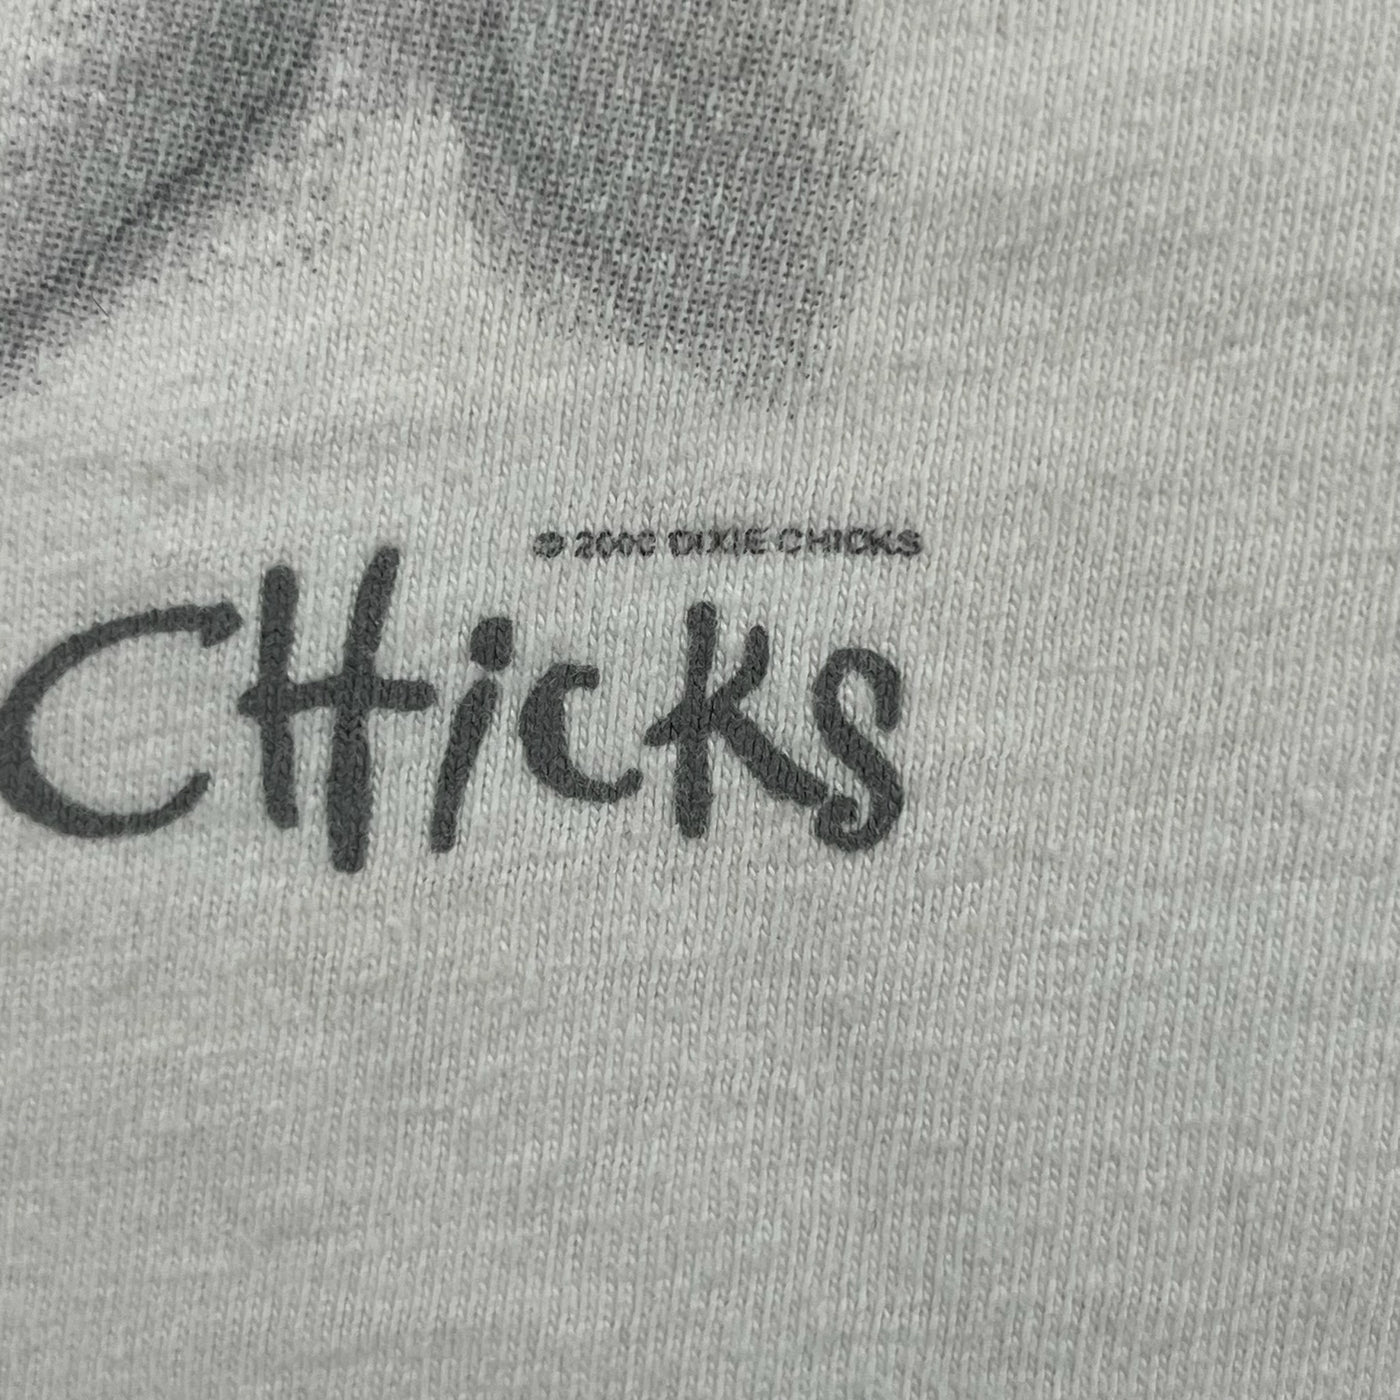 Vintage 2000 Dixie Chicks Youth Small 6-8